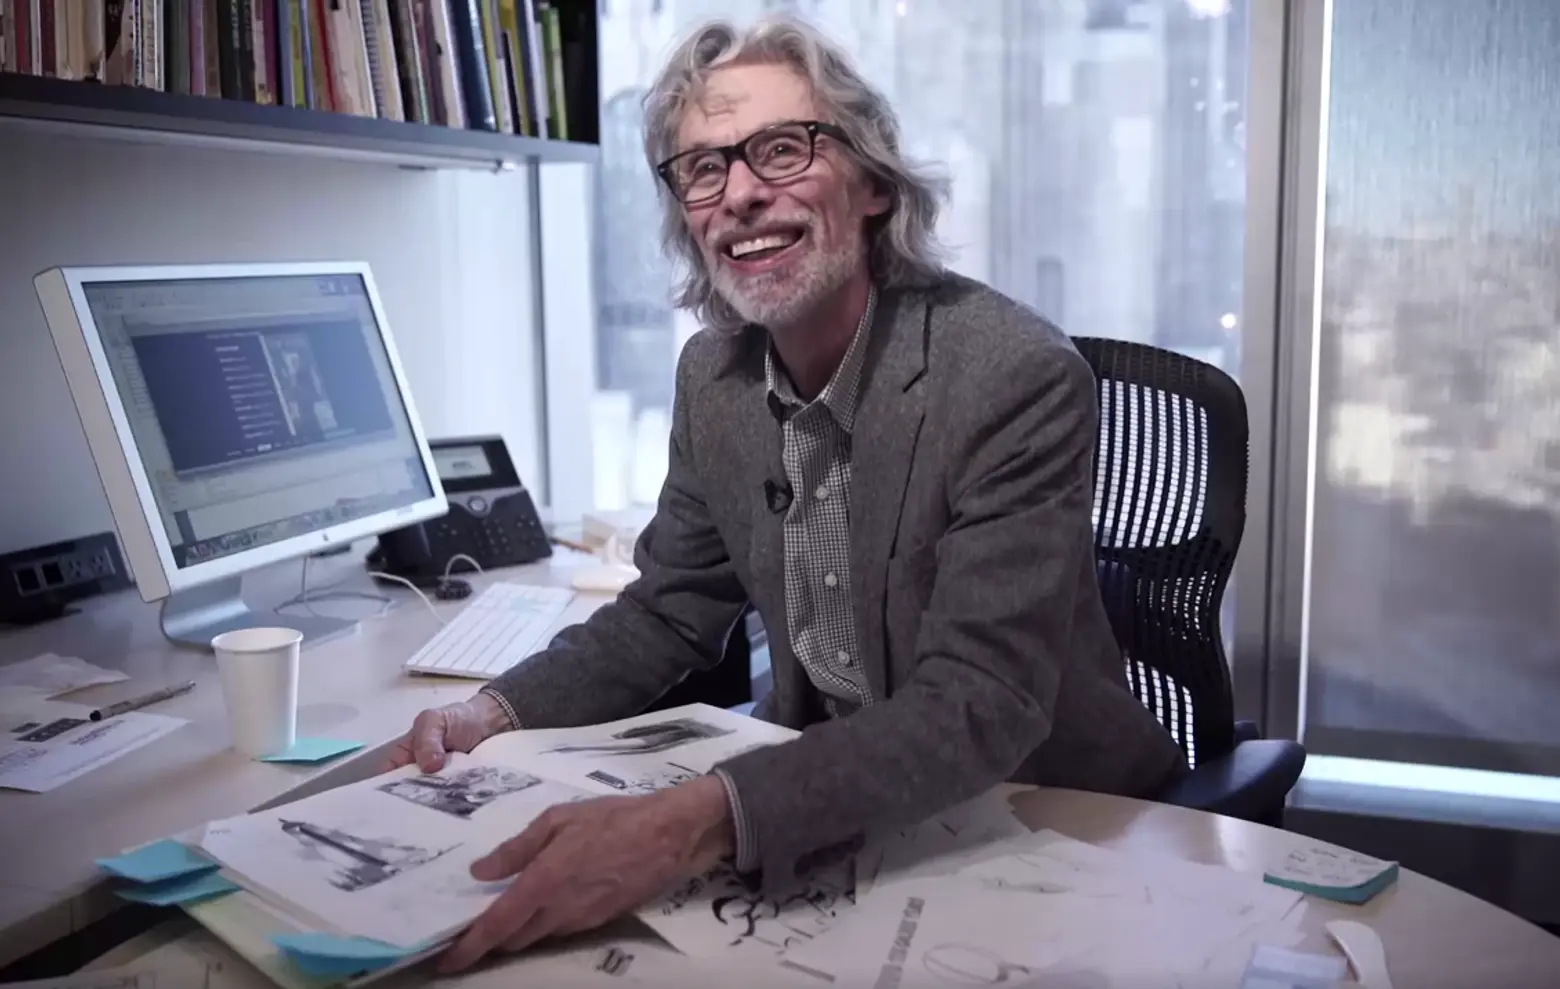 Experience the City’s Skyscrapers in Cartoons with The New Yorker’s Bob Mankoff